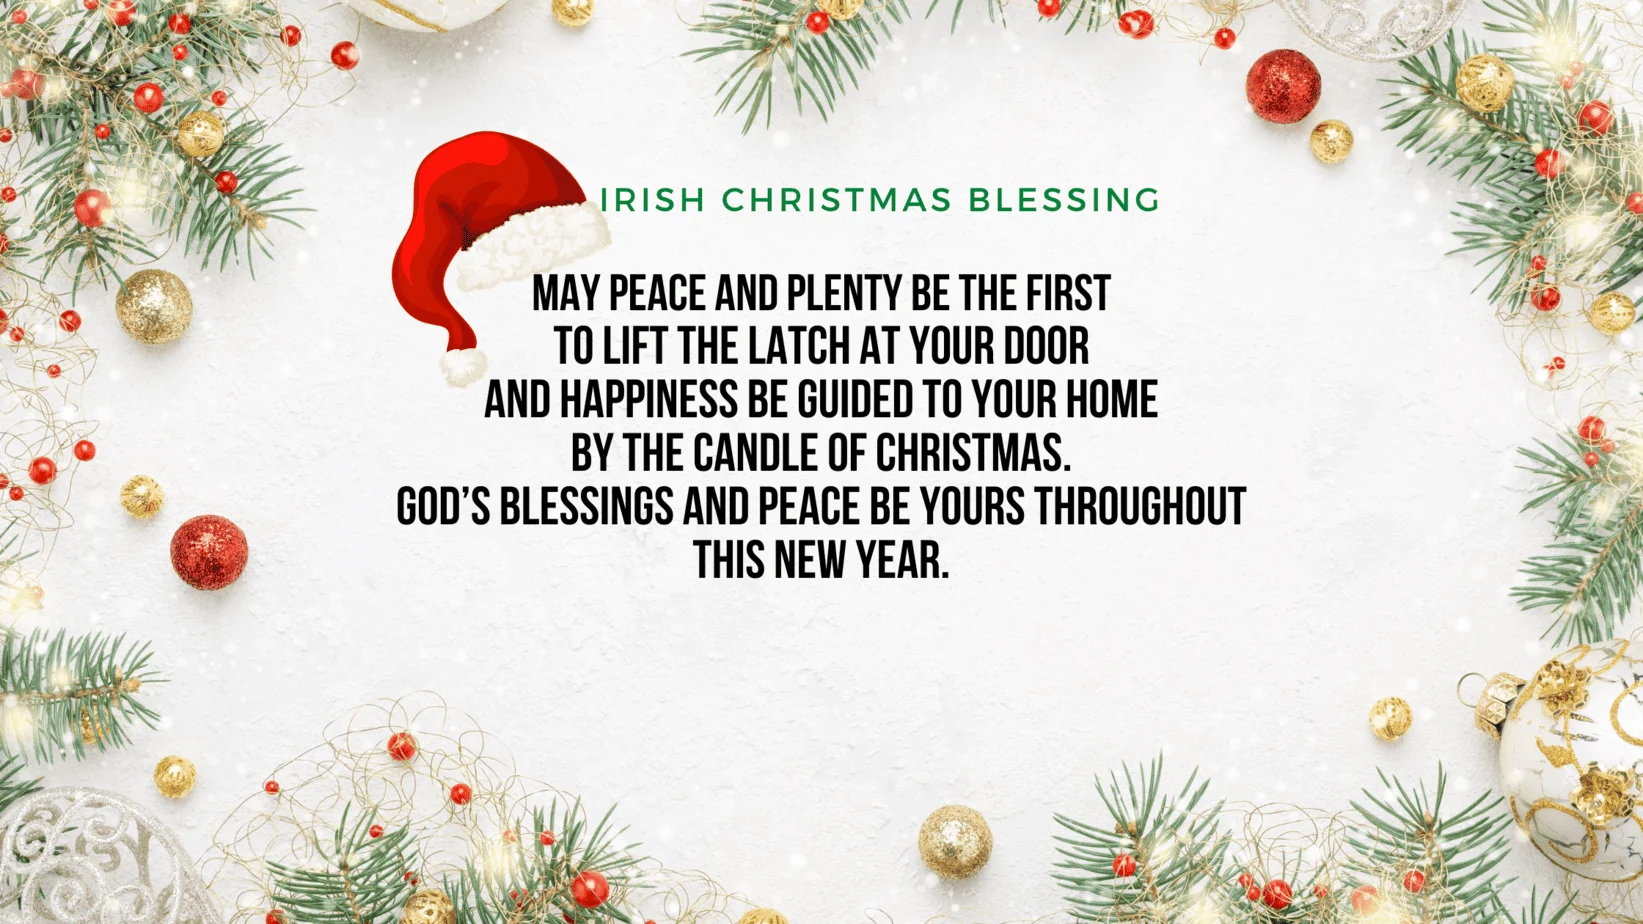 May peace and plenty be the first To lift the latch at your door And happiness be guided to your home By the candle of Christmas. God’s blessings and peace be yours throughout This New Year.